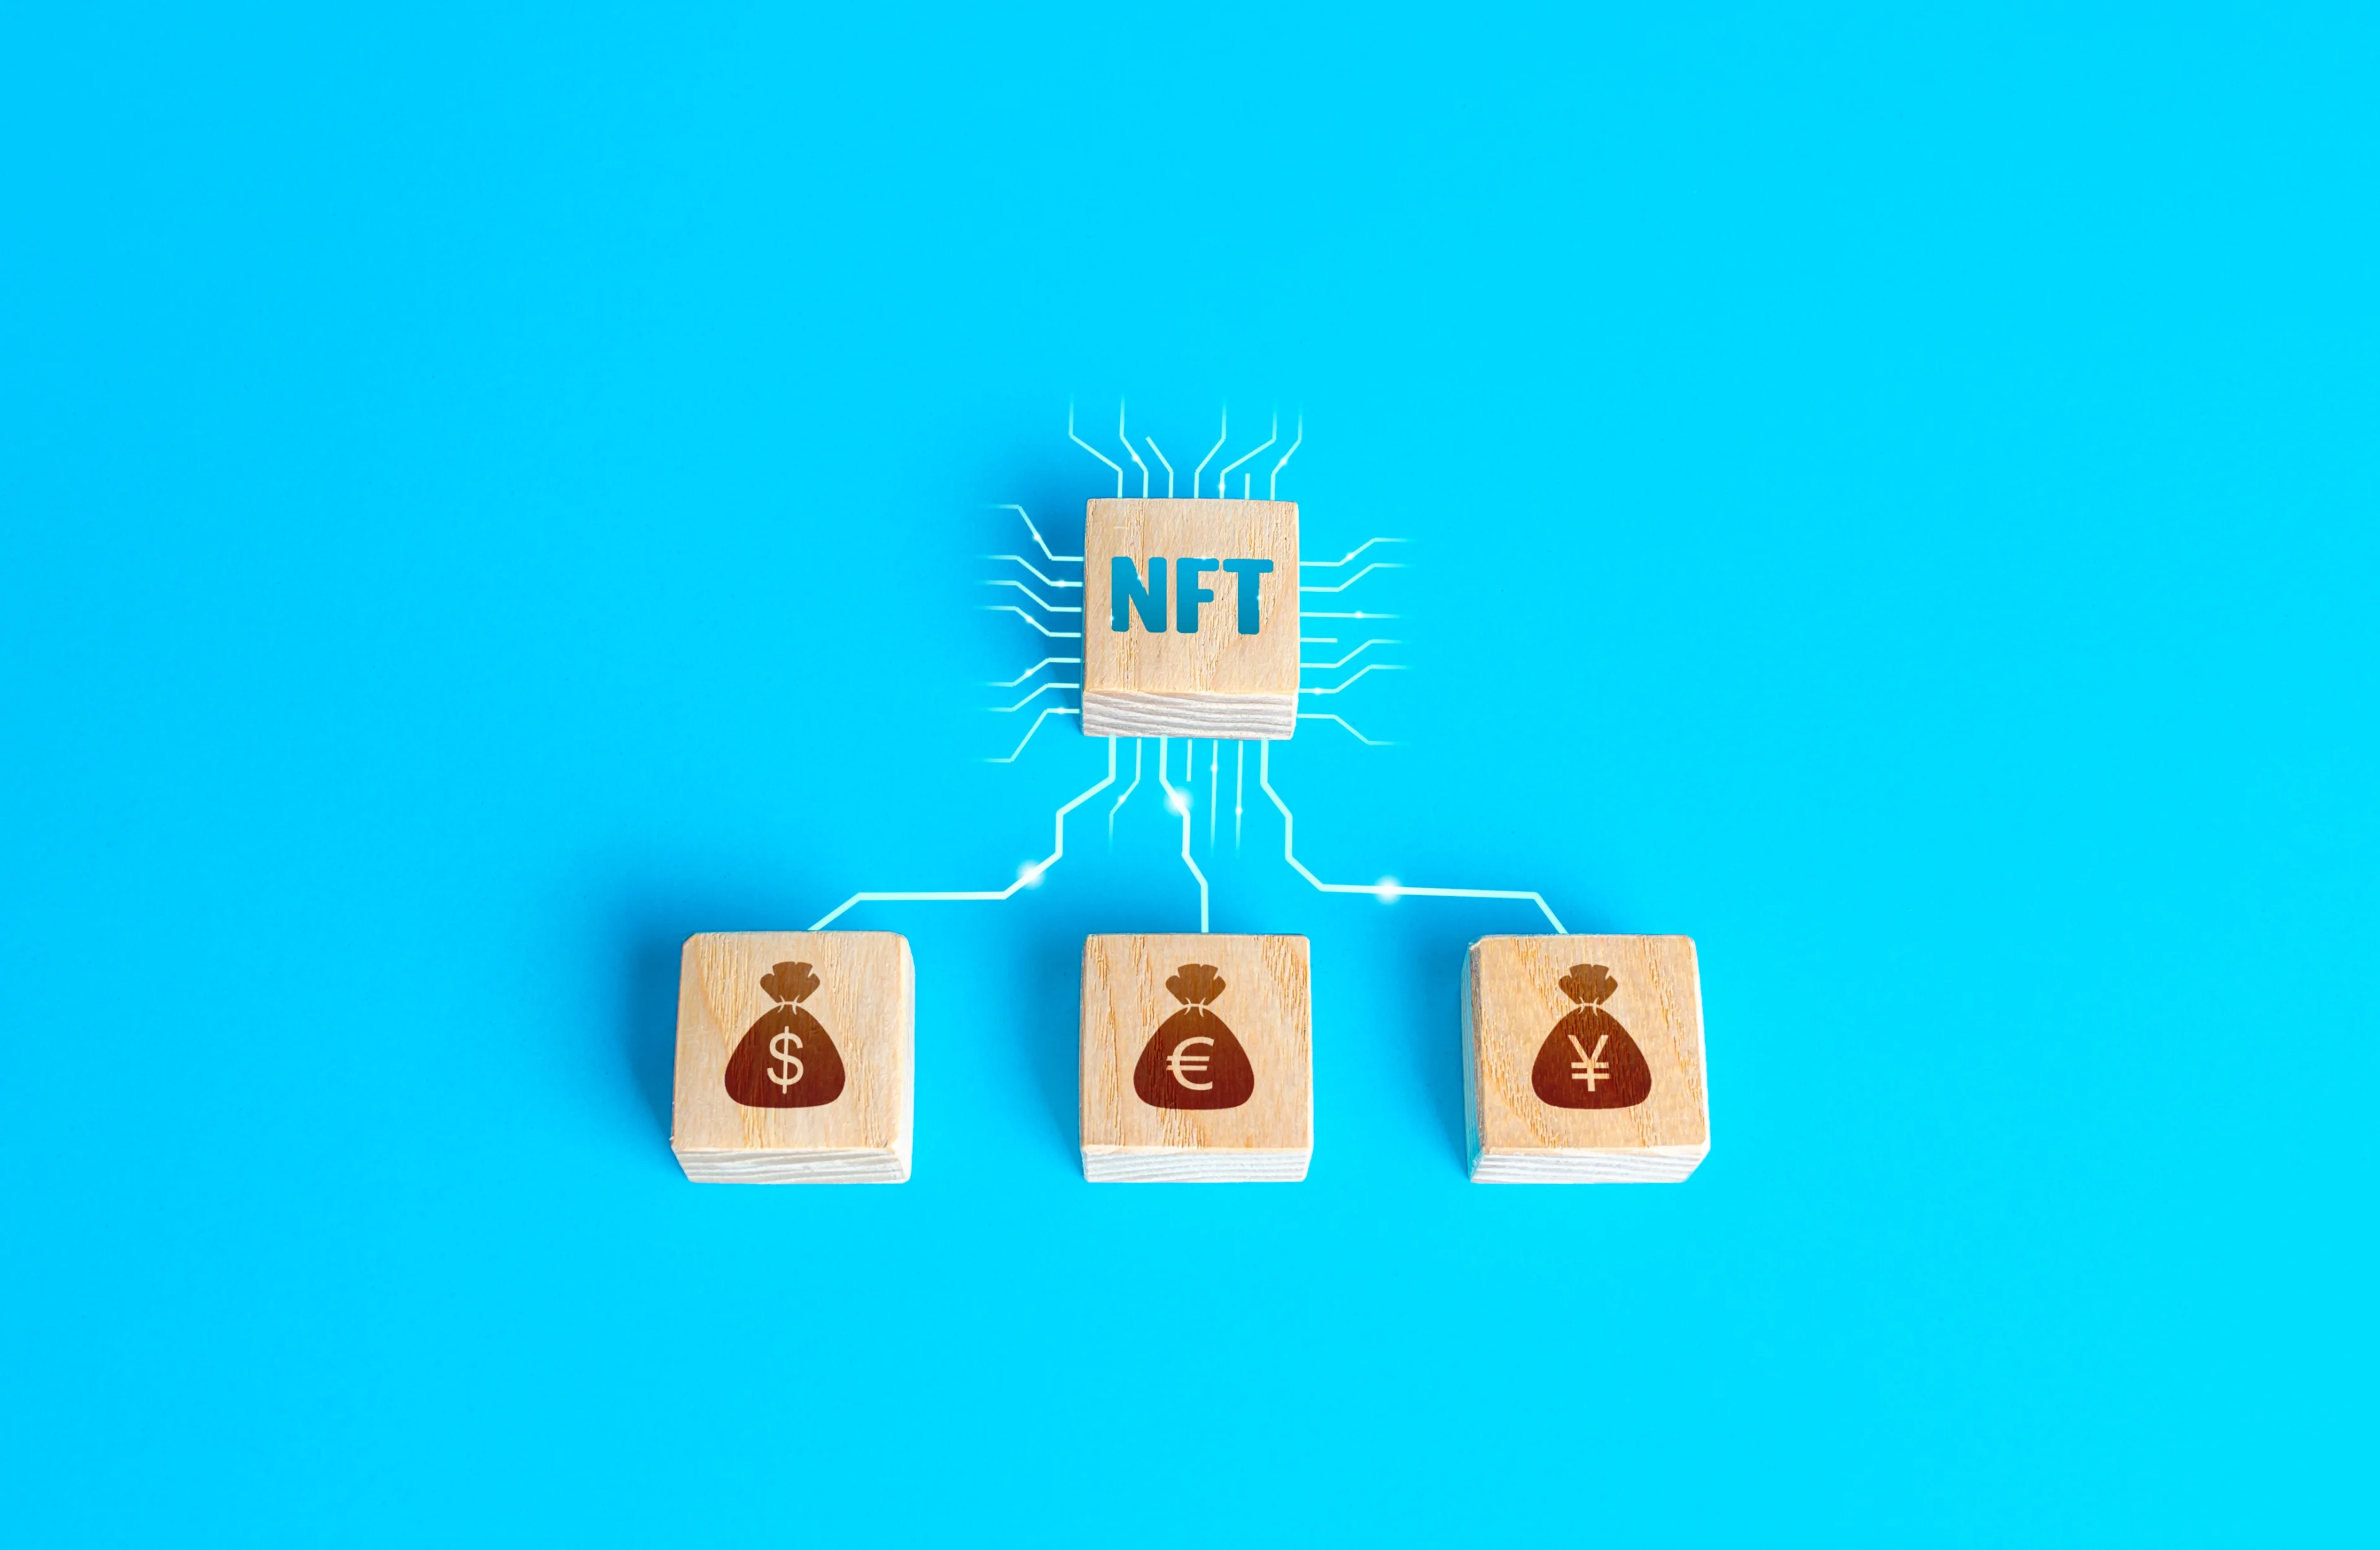 Learn everything you need to know to start trading NFTs on OpenSea.